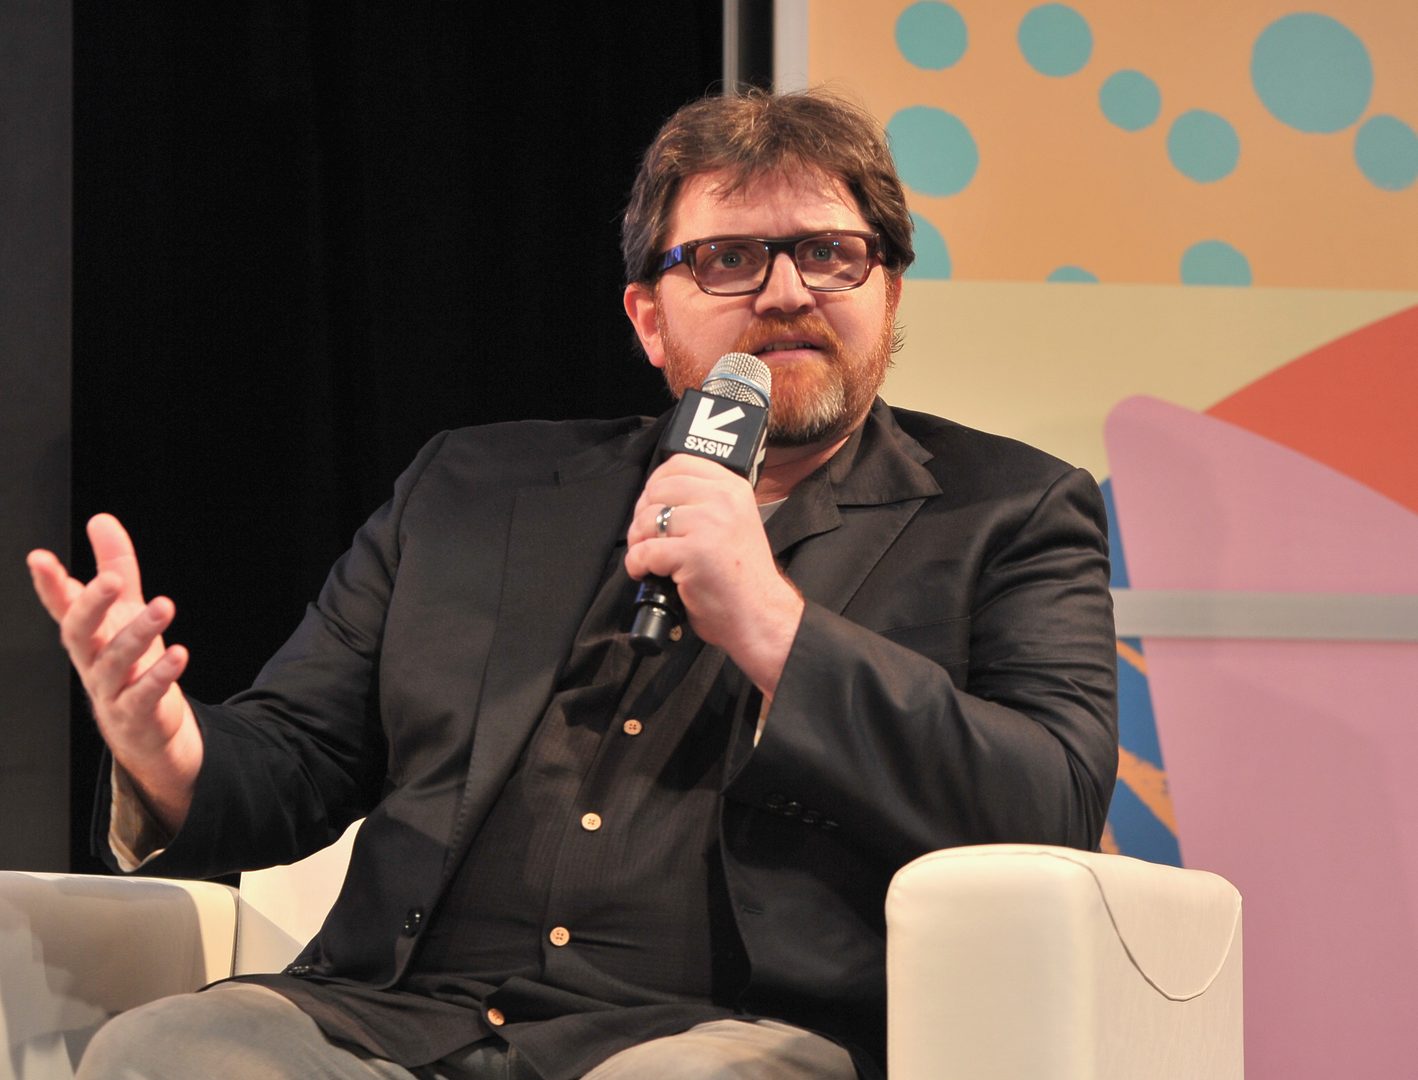 “A Conversation with Ernie Cline” featured the creator of Ready Player One. Photo by Chris Saucedo/Getty Images for SXSW